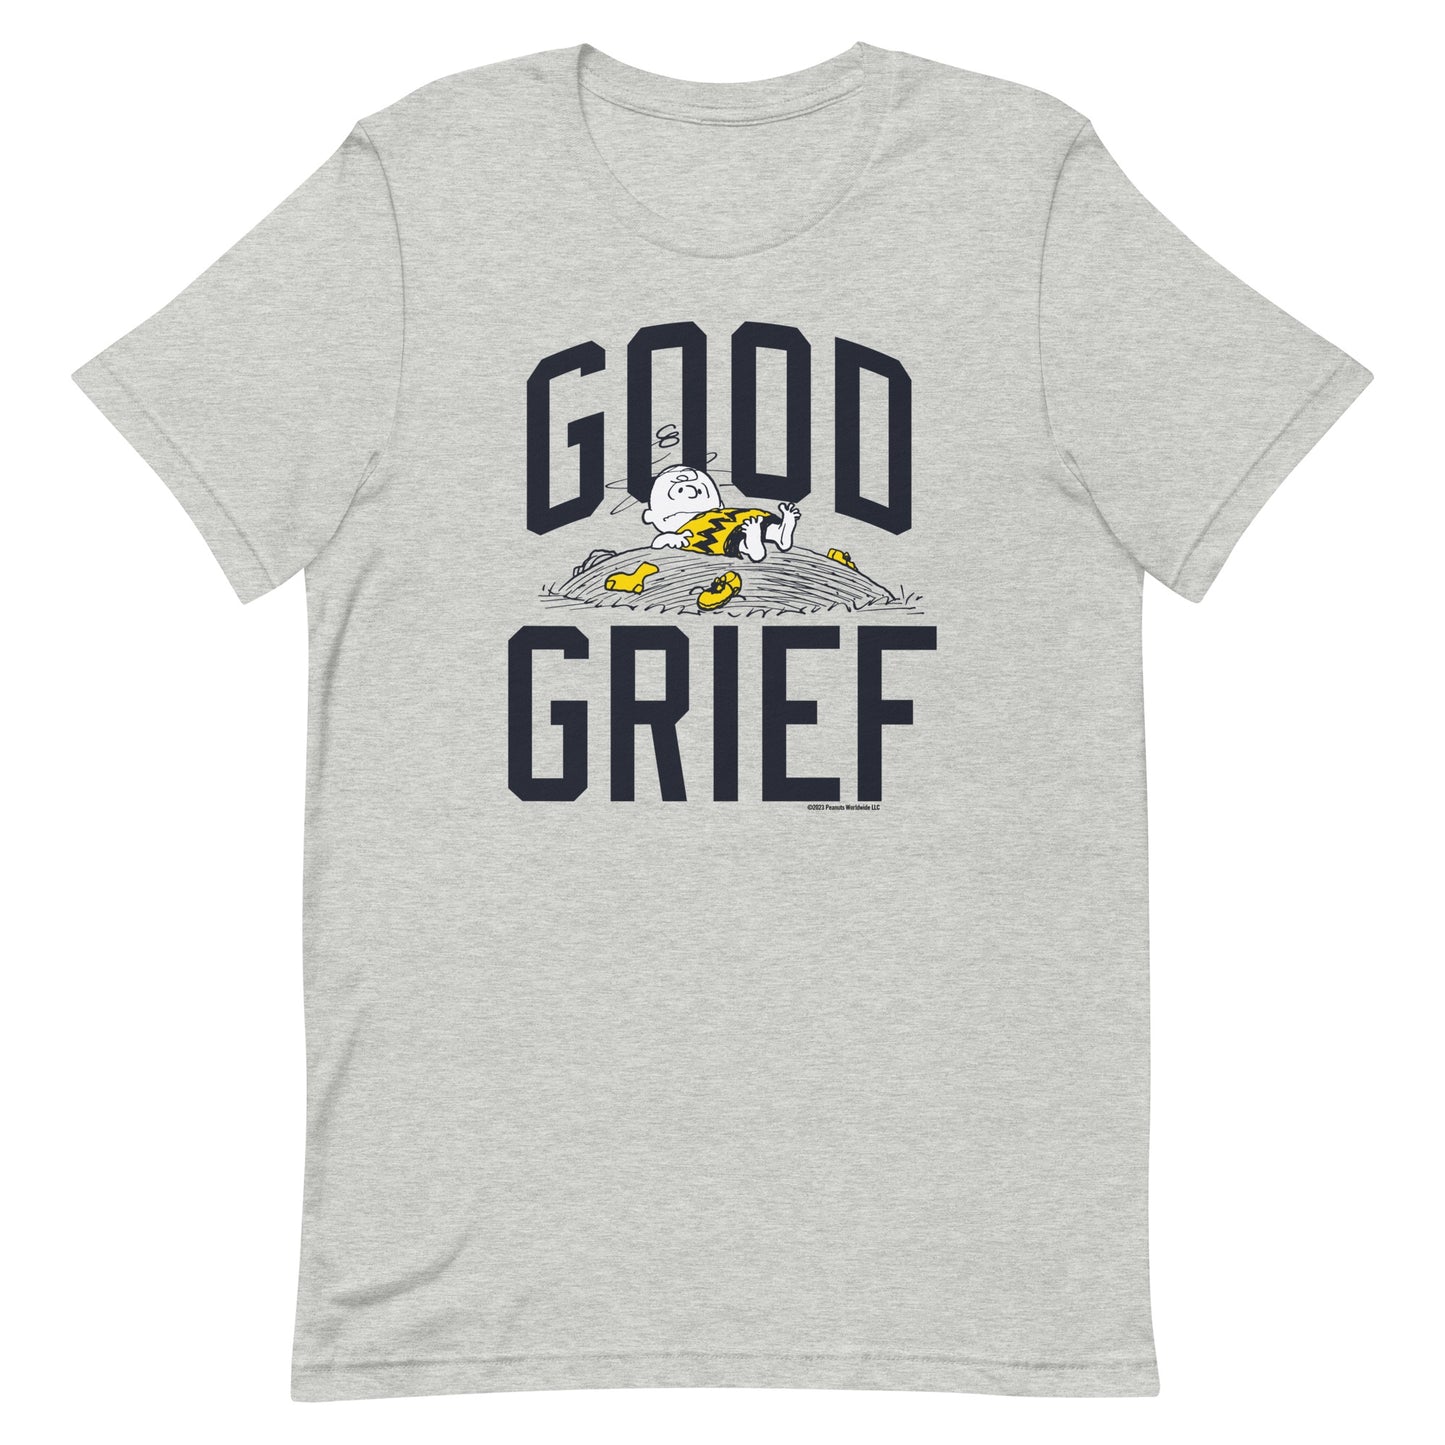 Charlie Brown Good Grief Adult T-Shirt